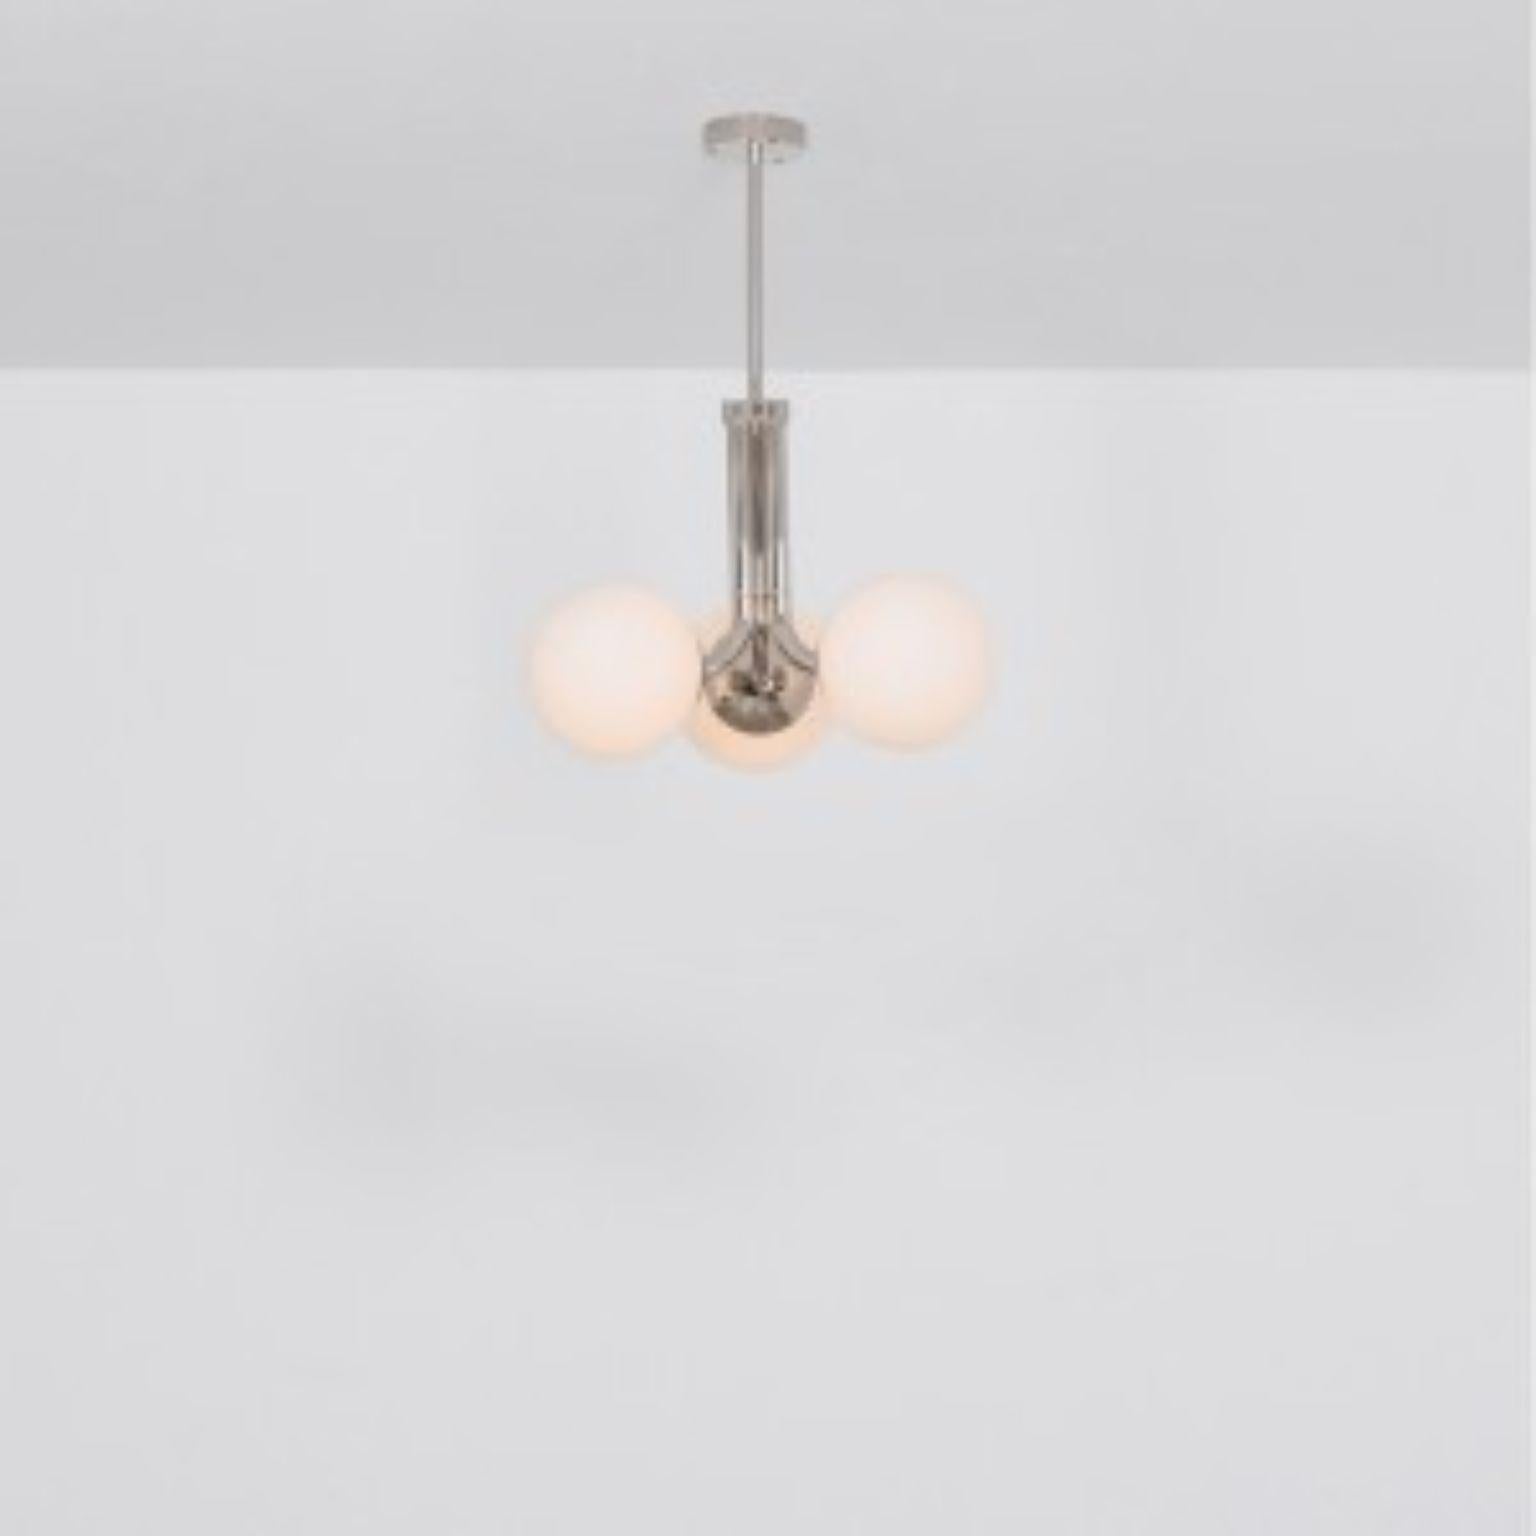 Tubular SM Polished Nickel Pendant Light 3 by Schwung
Dimensions: W 48 x D 48 x H 58 cm
Materials: Polished nickel, frosted glass

Finishes available: Black gunmetal, polished nickel, brass.
  

 Schwung is a german word, and loosely defined, means